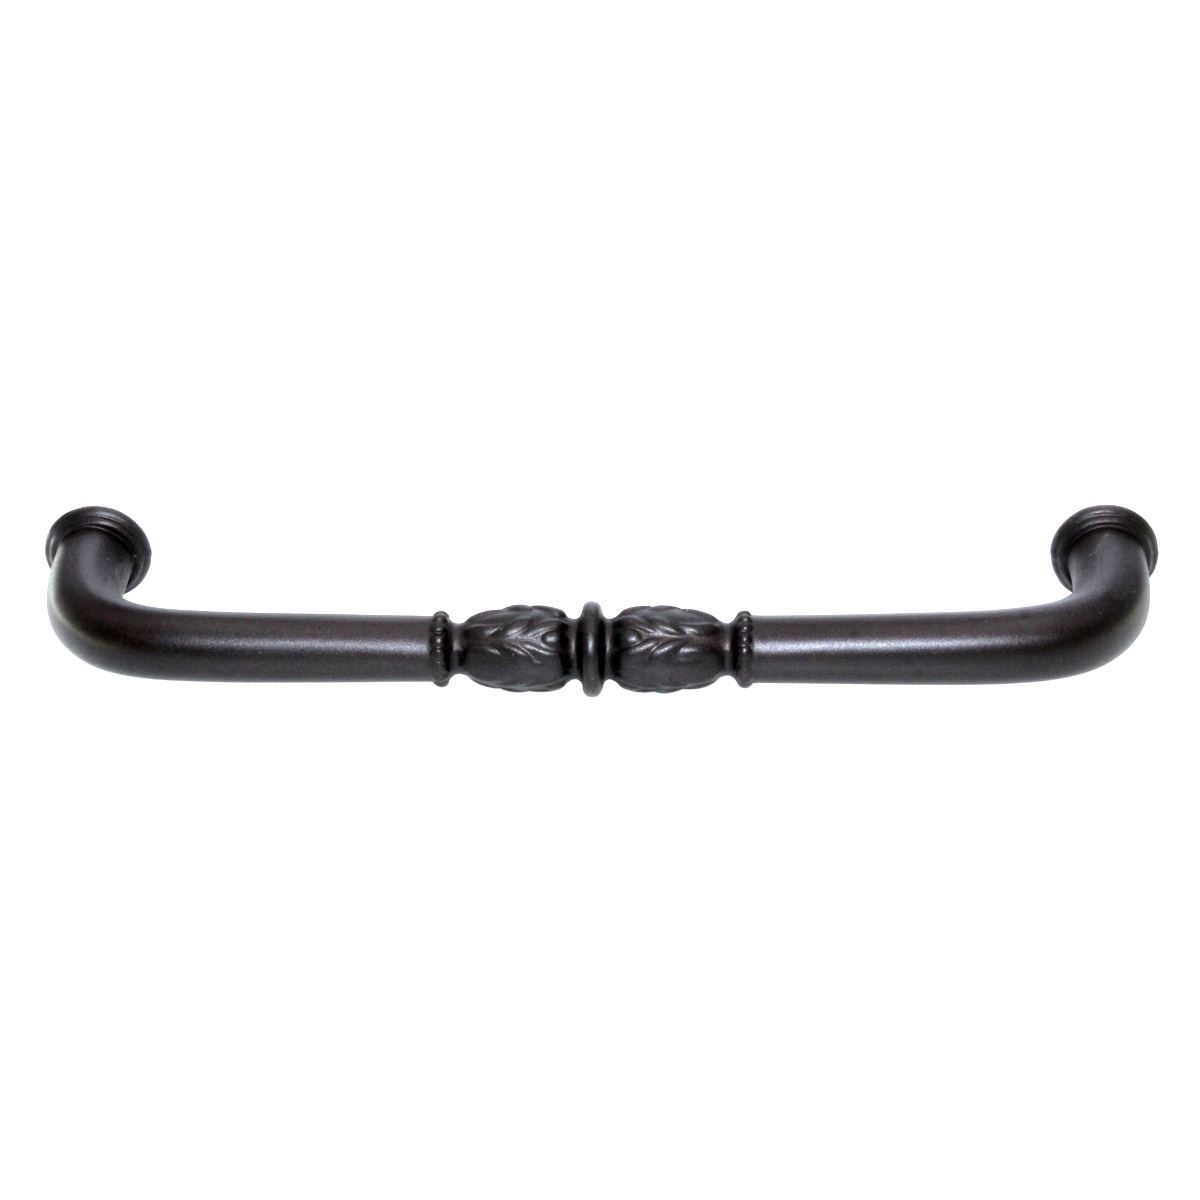 Schaub And Company Meridian Cabinet Arch Pull 6" Ctr Oil-Rubbed Bronze 803-10B